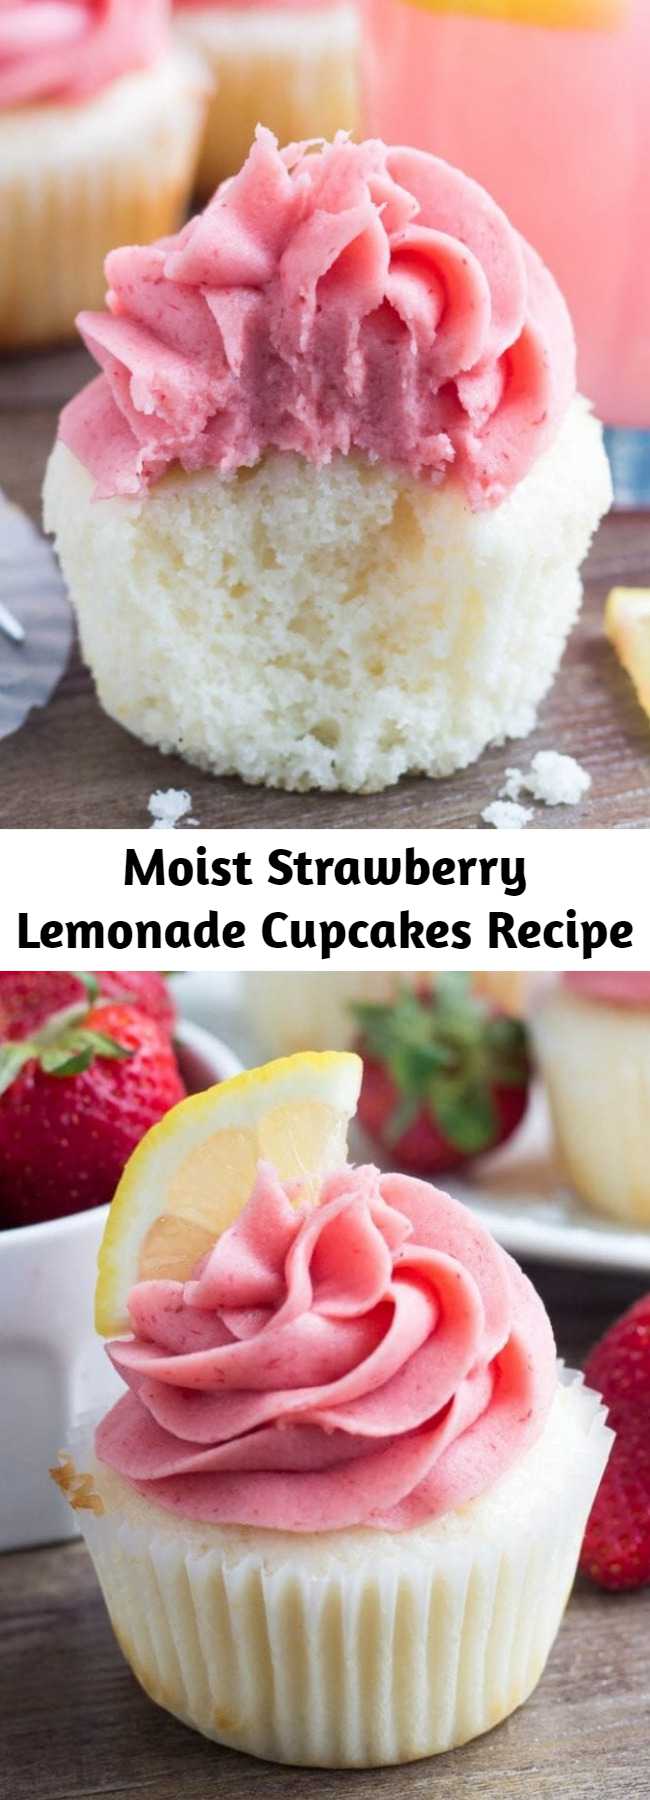 Moist Strawberry Lemonade Cupcakes Recipe - These Strawberry Lemonade Cupcakes are so pretty and perfect for spring or summer. They start with fluffy, moist lemon cupcakes. Then they're topped with strawberry frosting made from fresh berries!